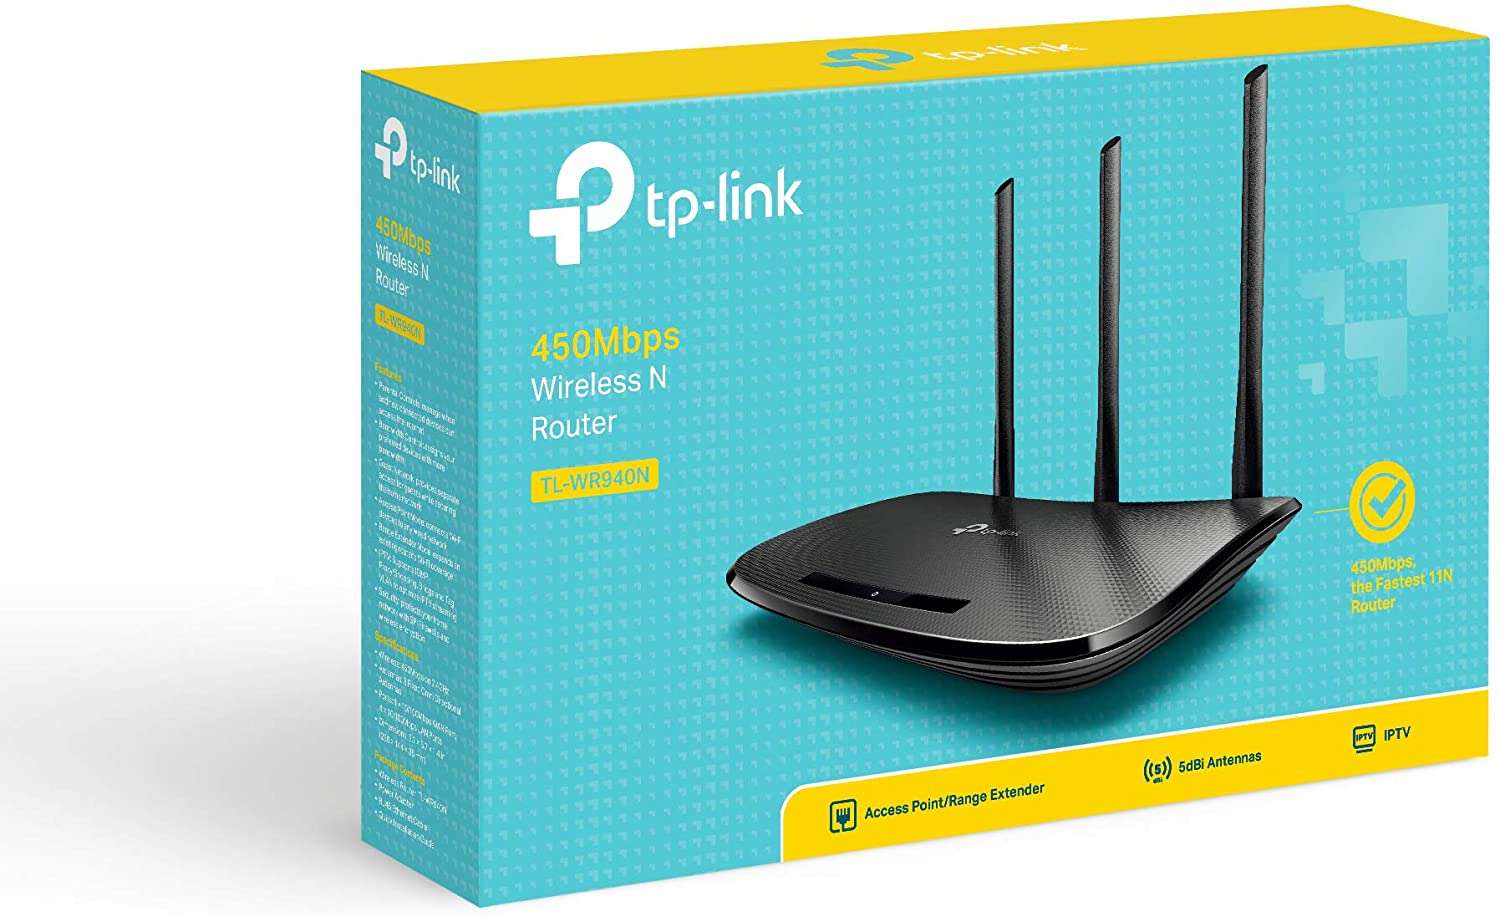 How to Setup the TP-link 450Mbps Wireless N Router as an Extender